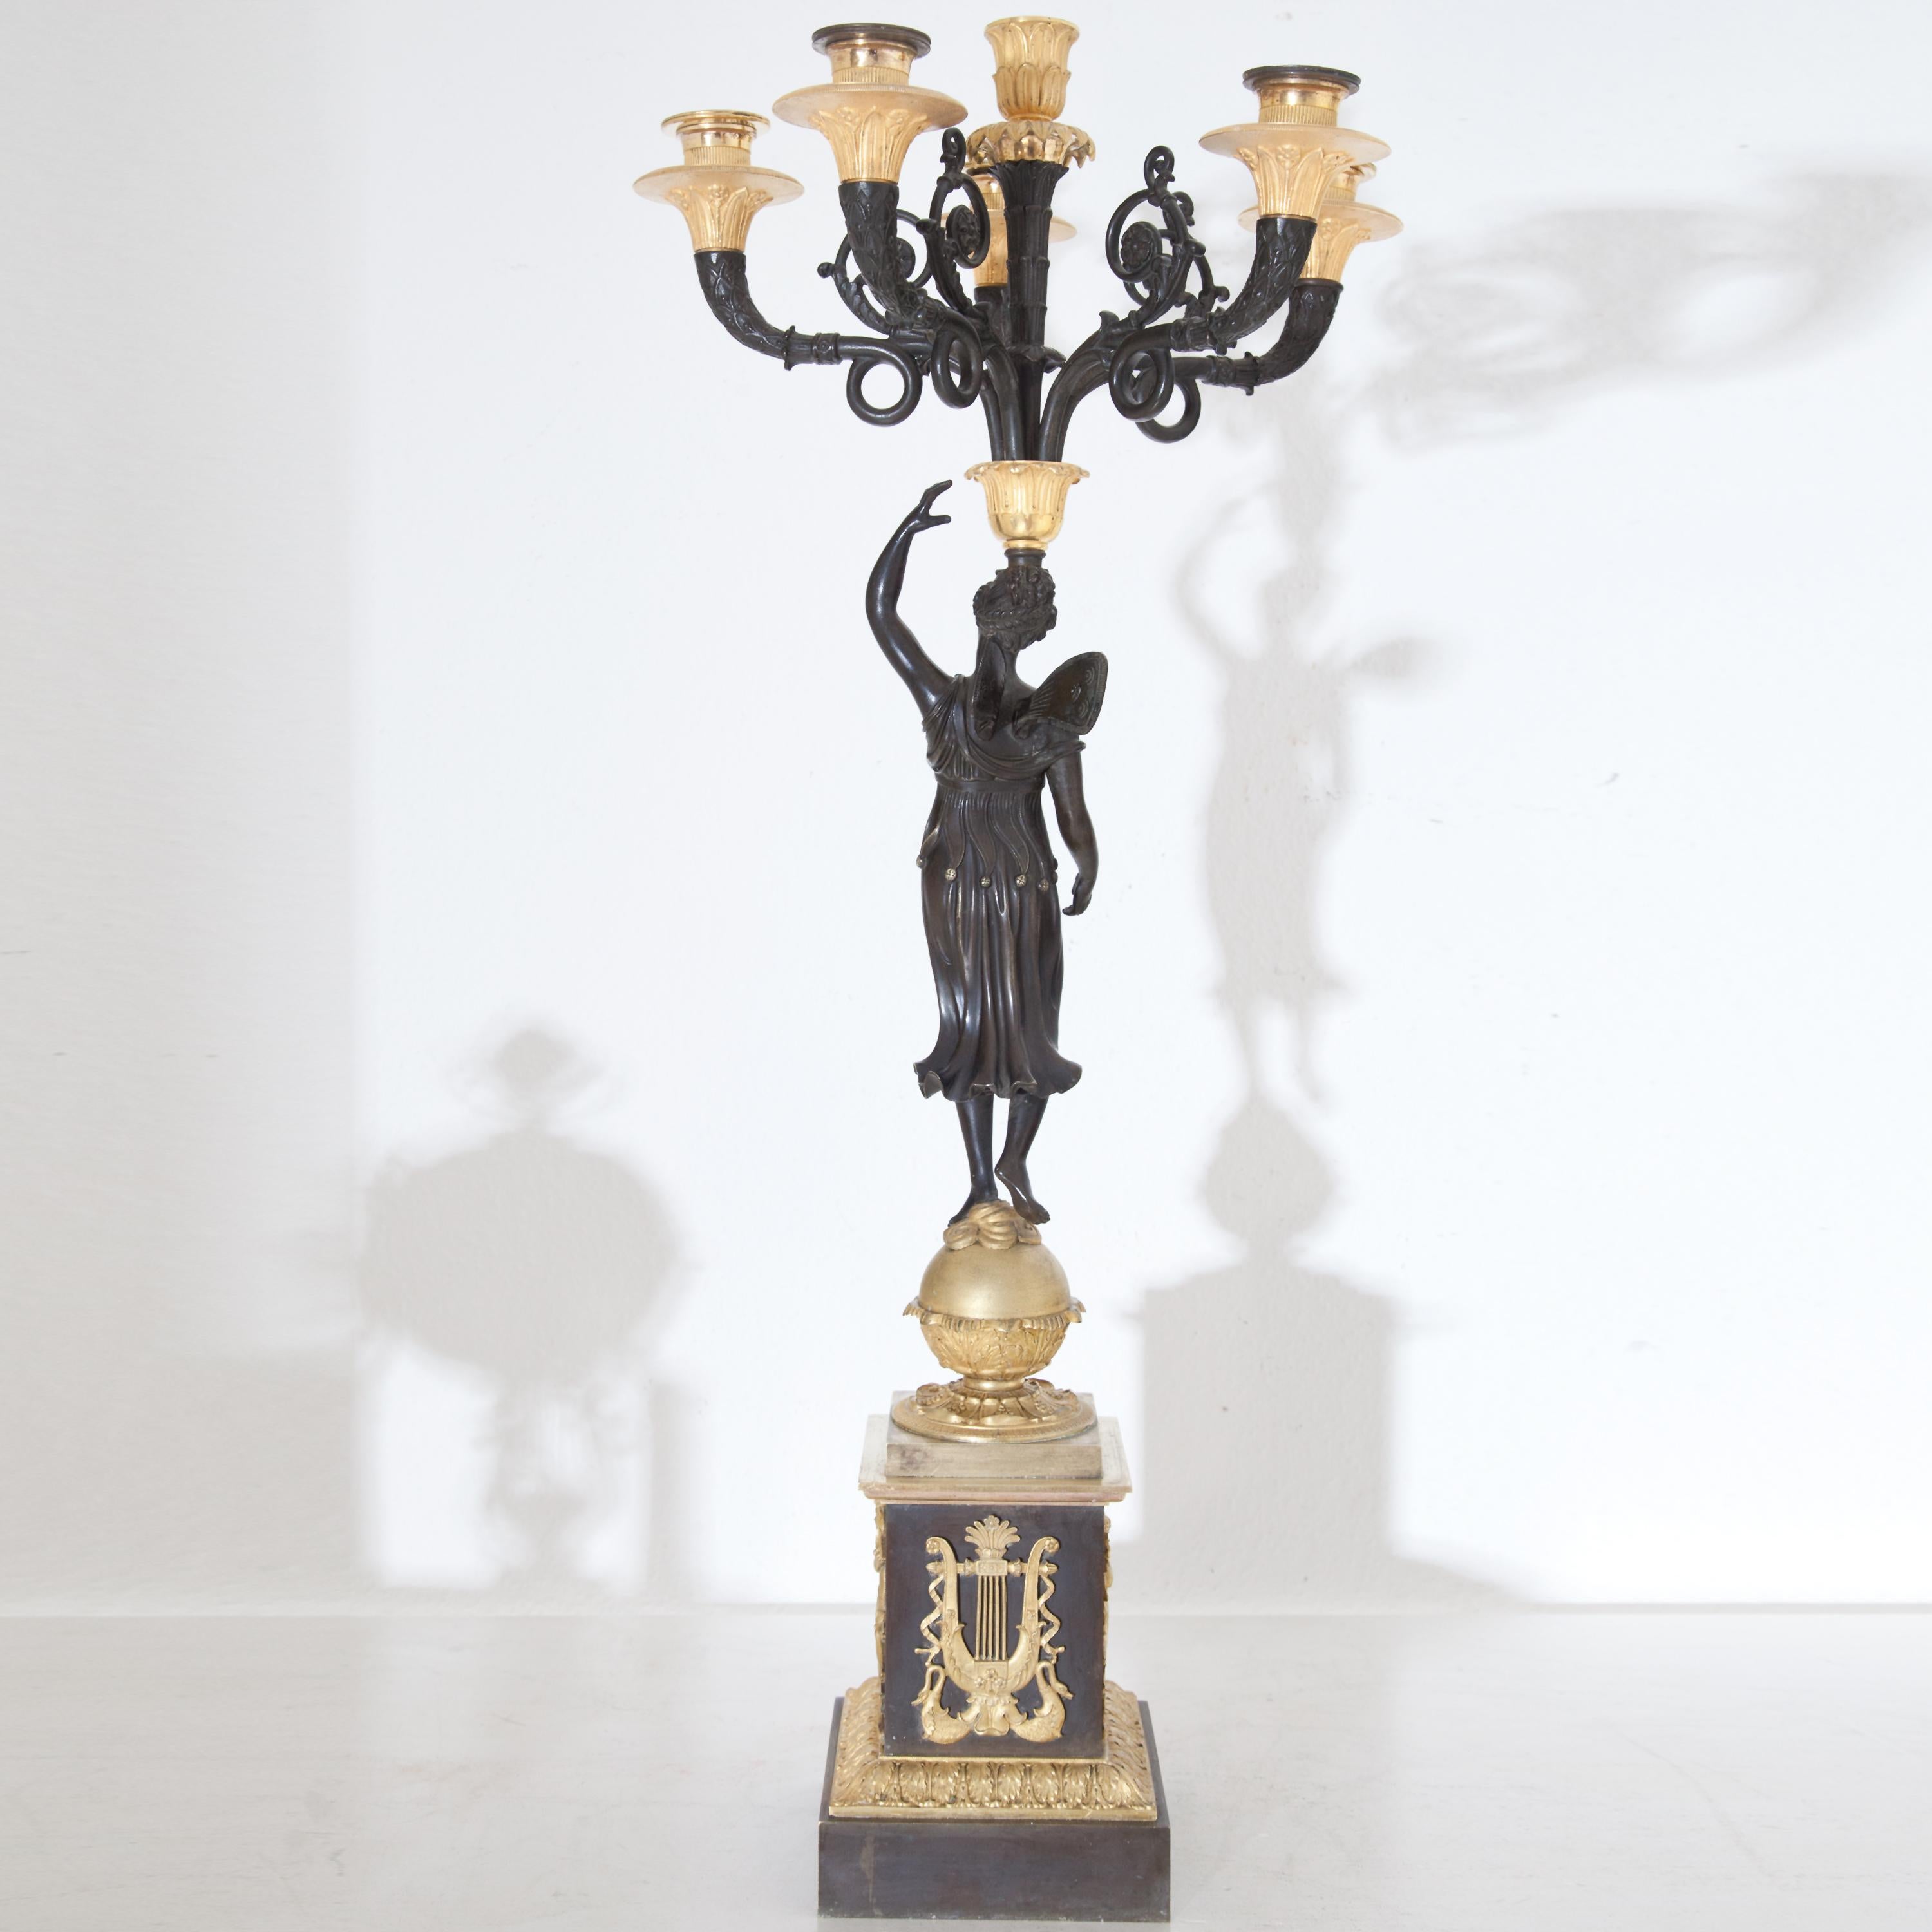 Bronze Empire Candelabras, France, Early 19th Century